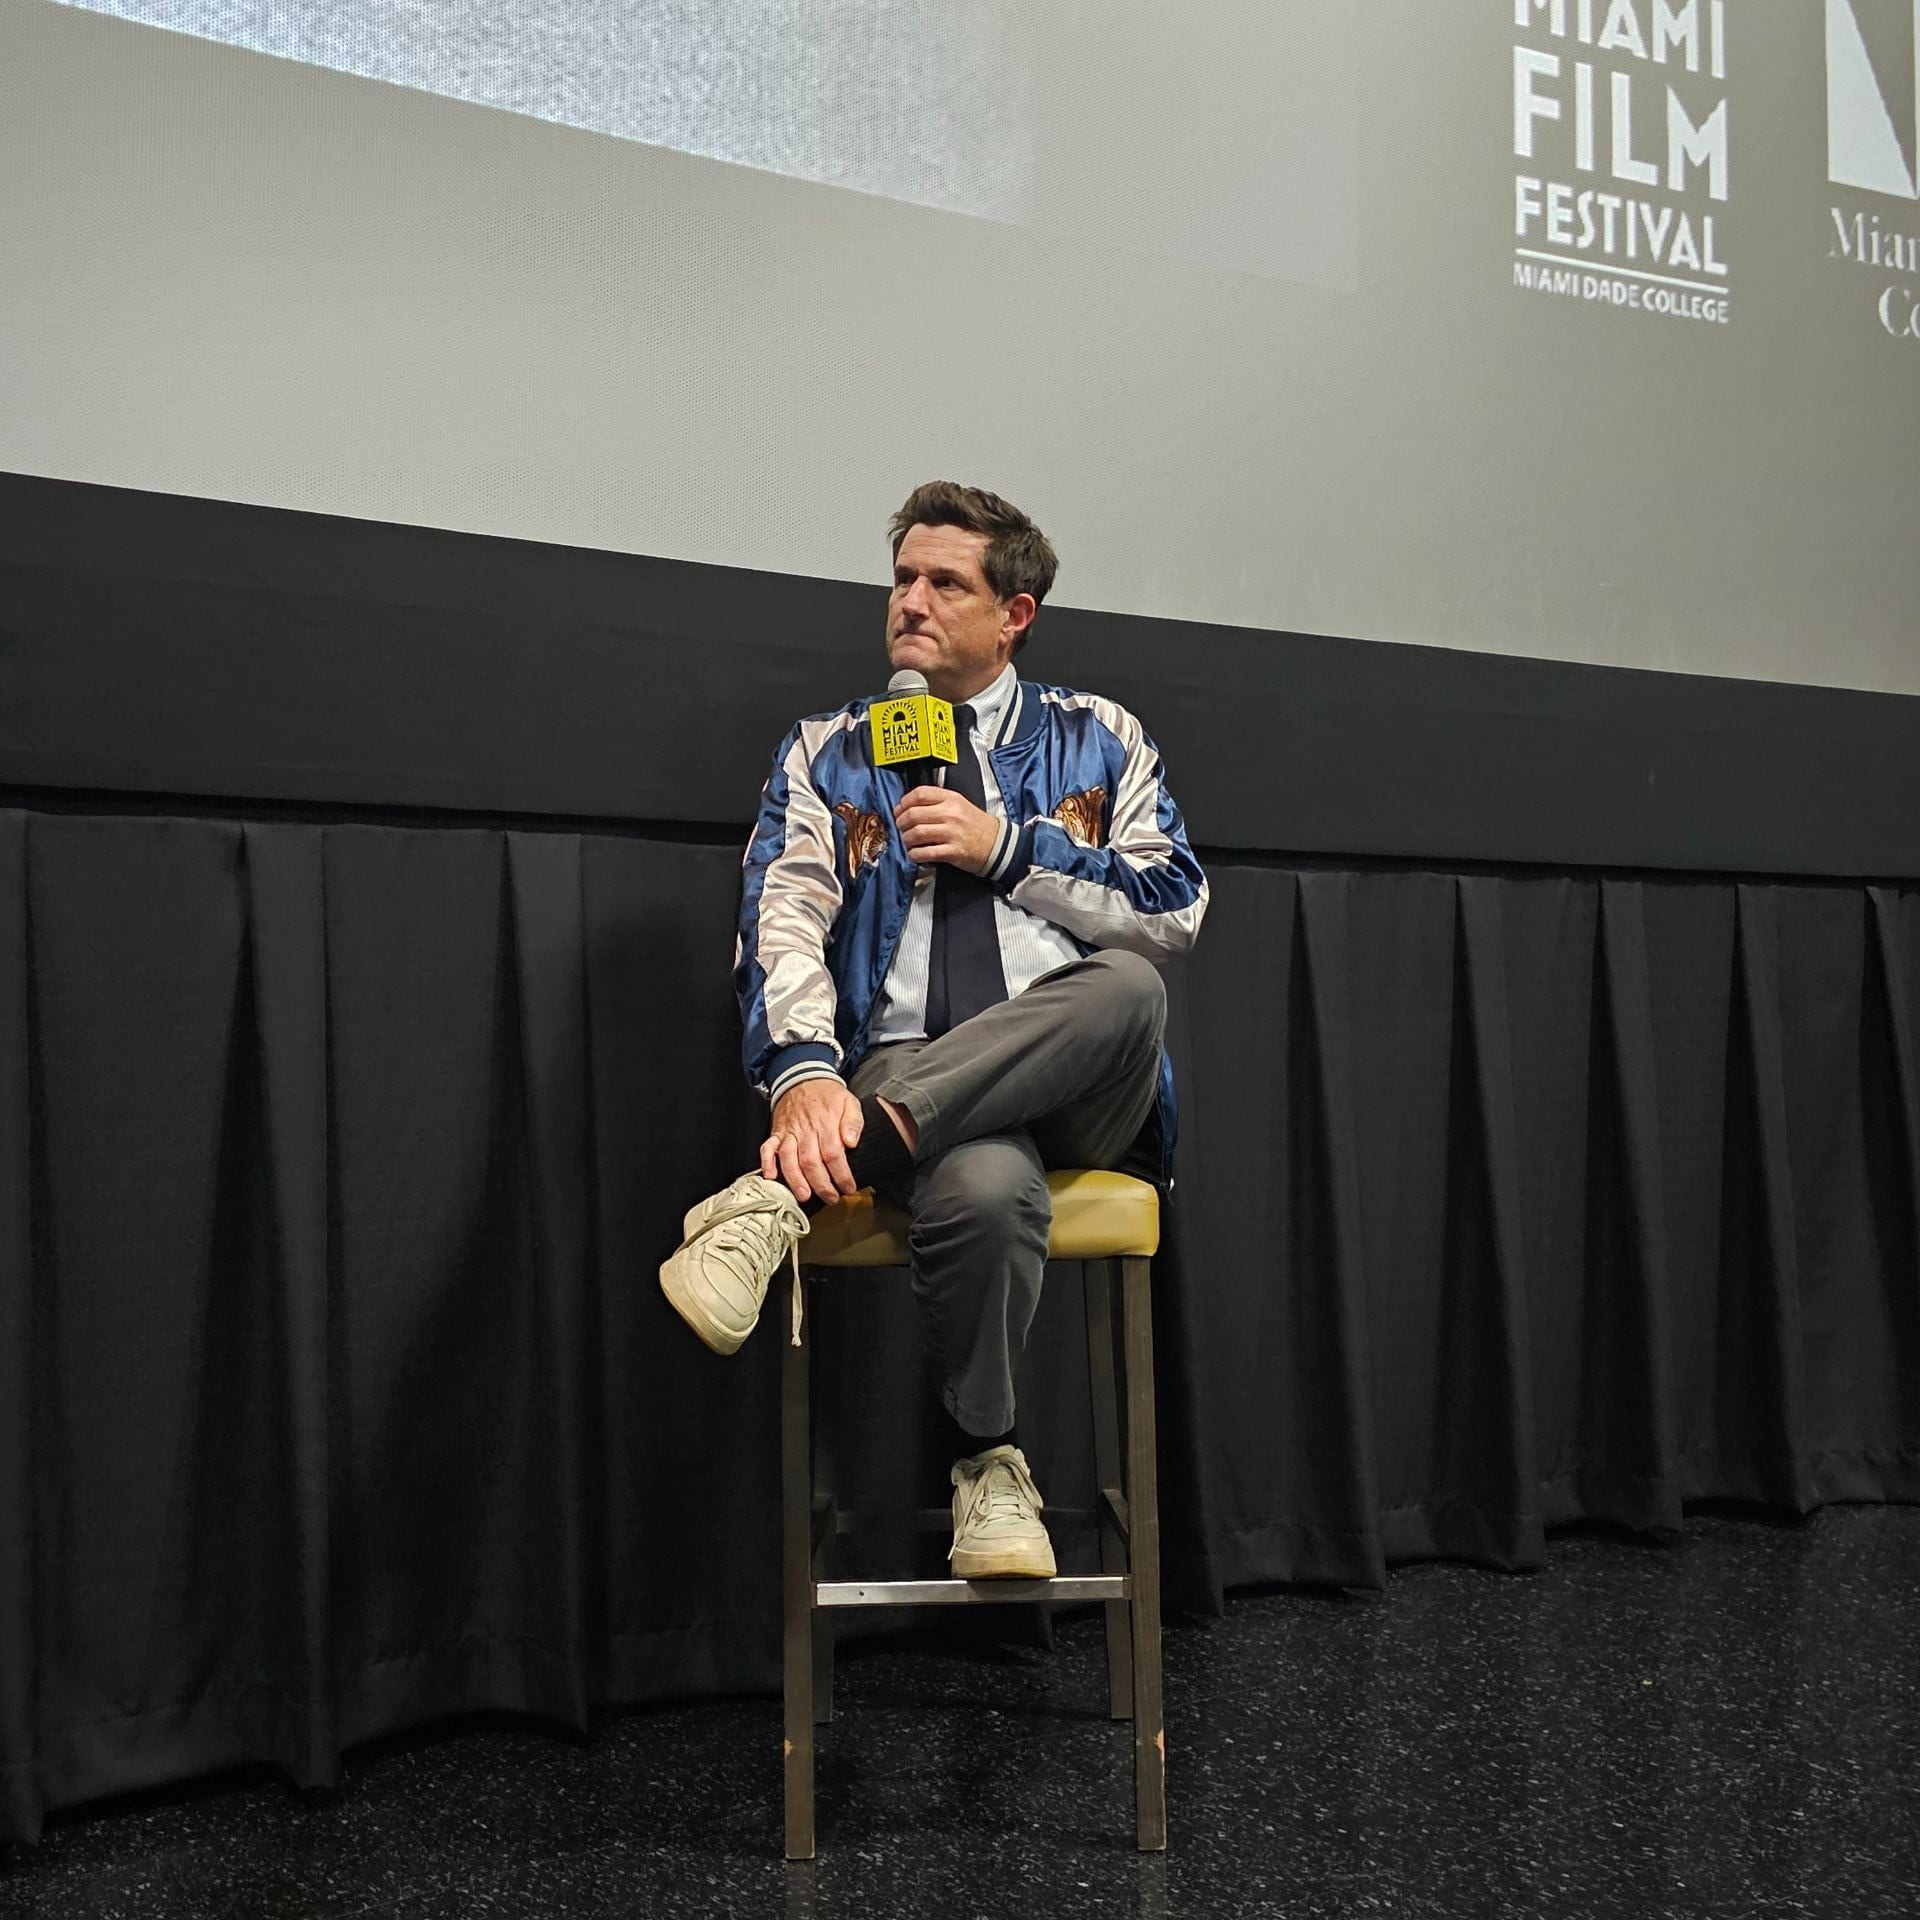 PHOTO BY DANNA BERTELMichael Showalter, director of "The Idea of You," participates in a Q&A.